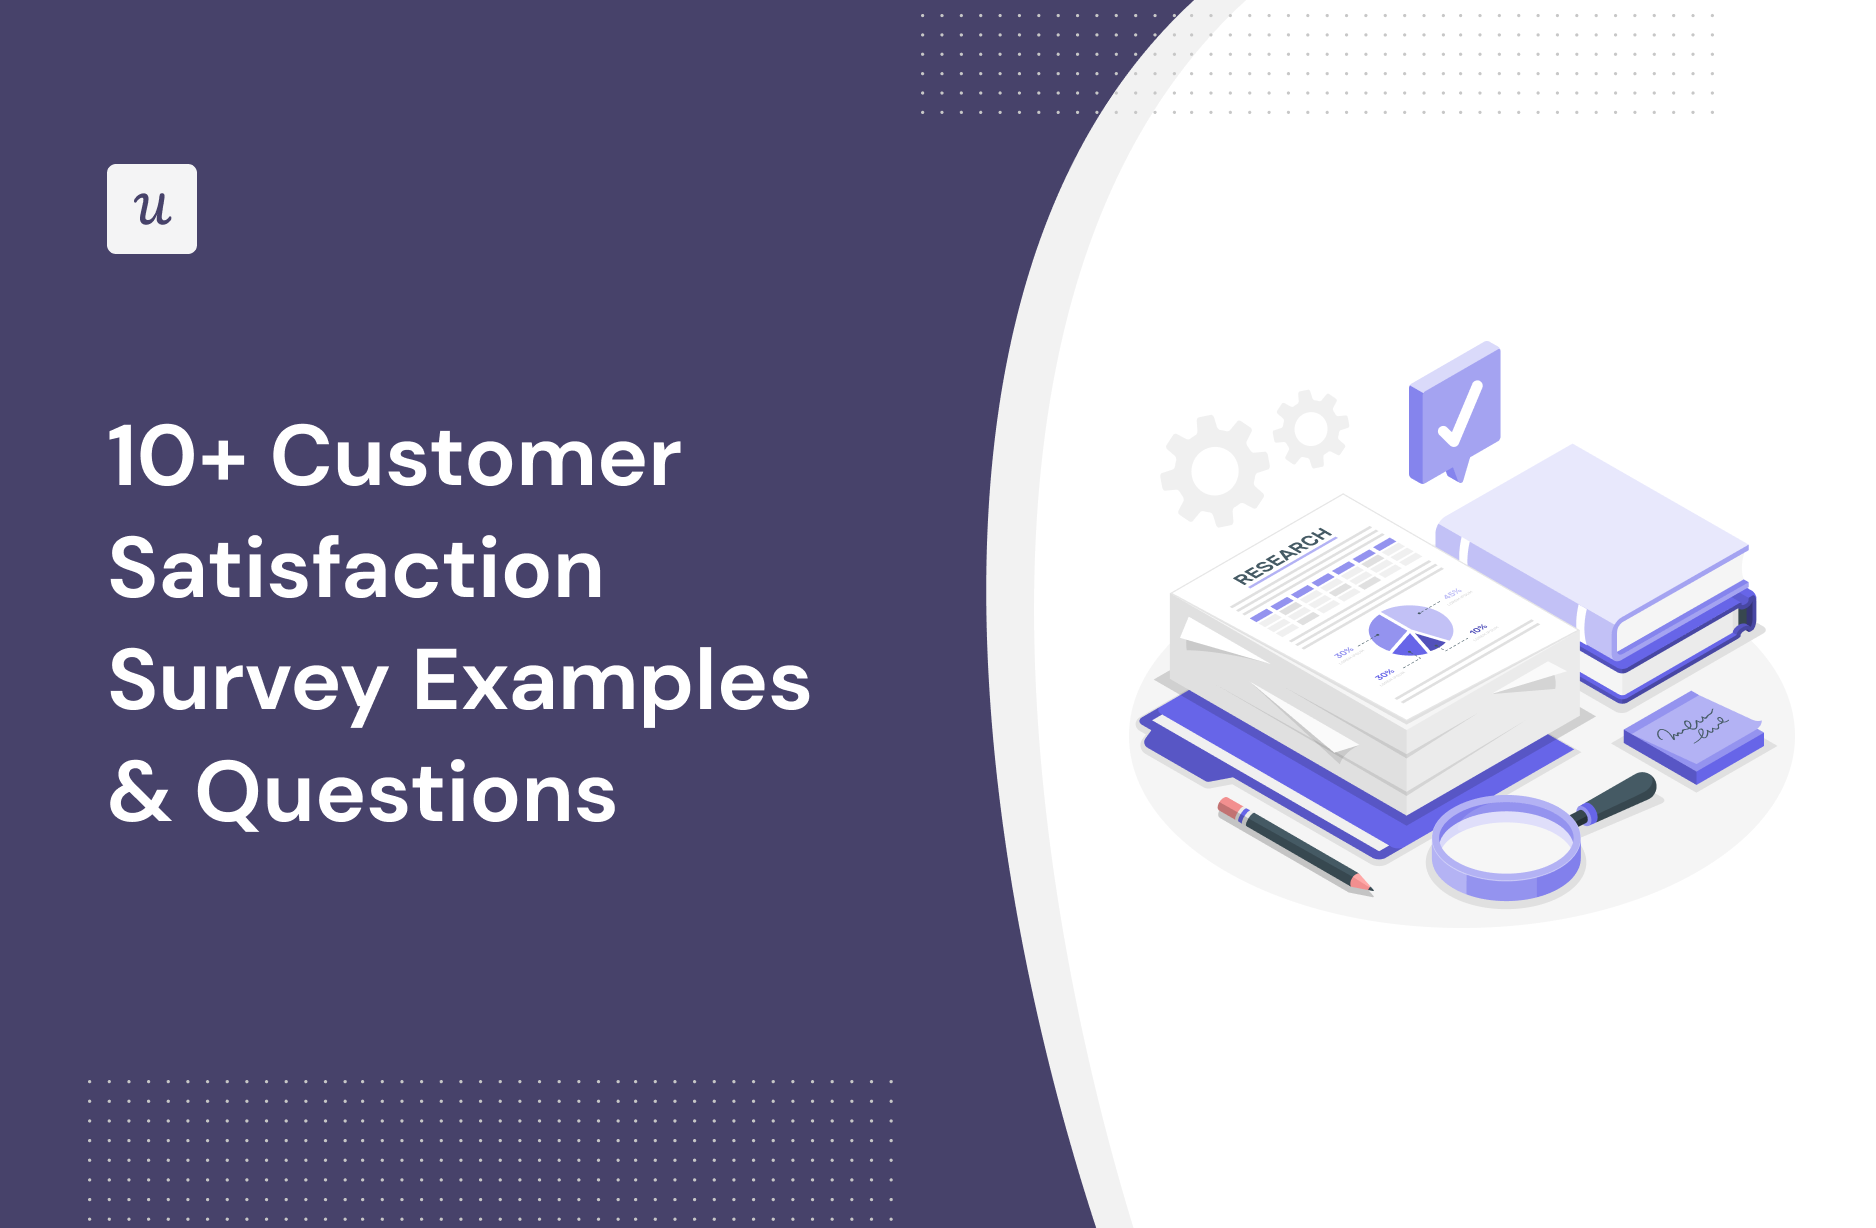 10+ Customer Satisfaction Survey Examples & Questions